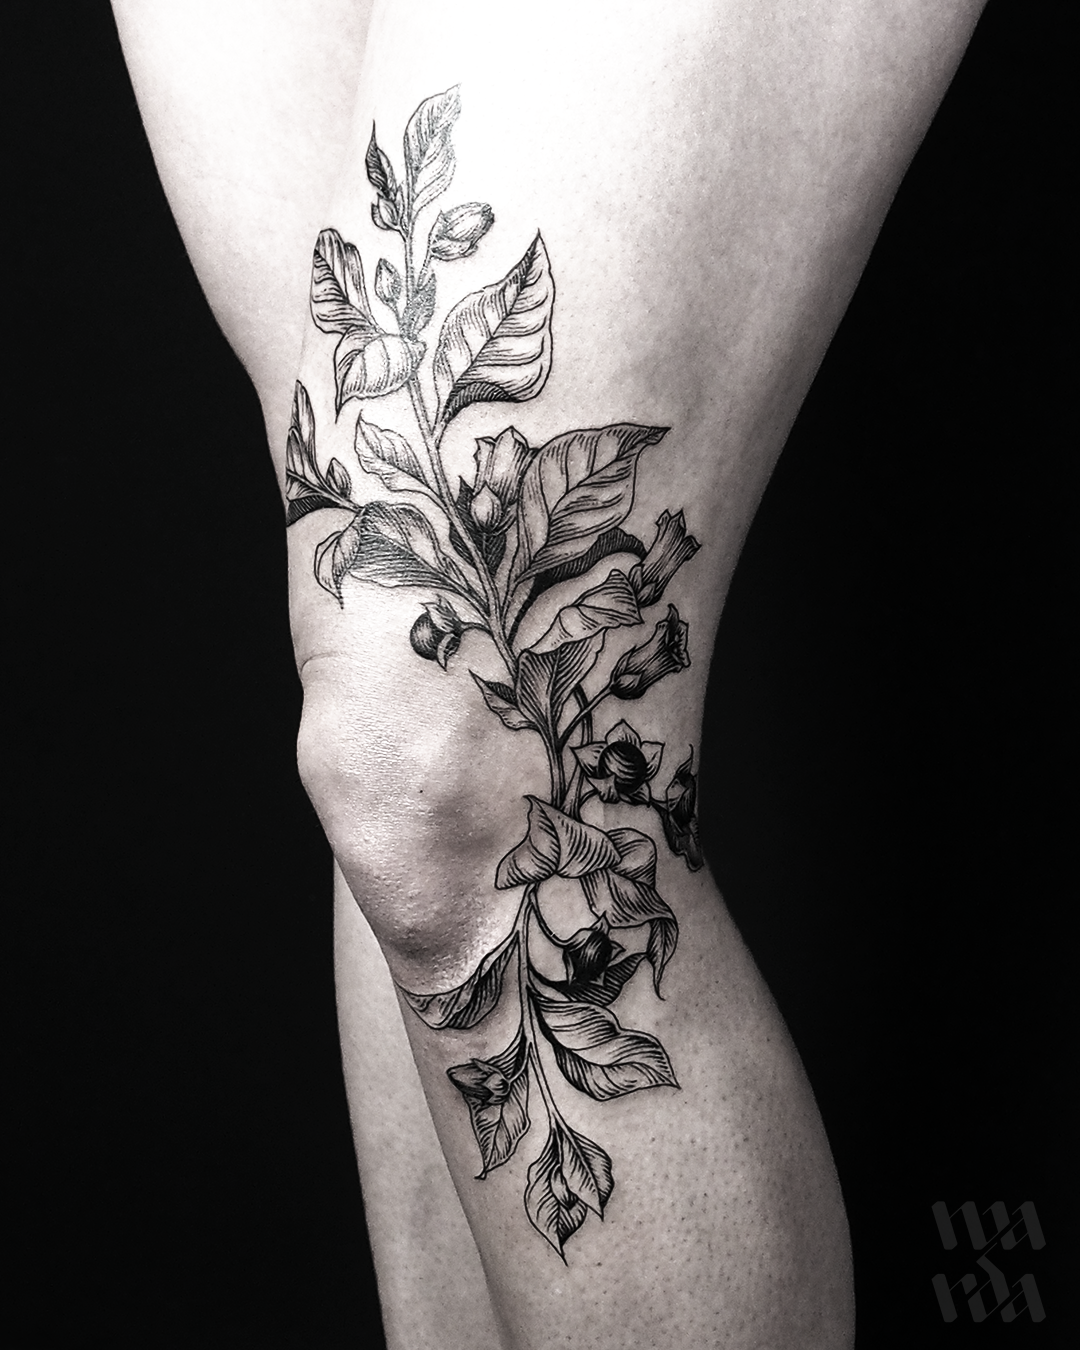 90 Best Floral Tattoo Designs  Meanings  Symbols of Love 2019